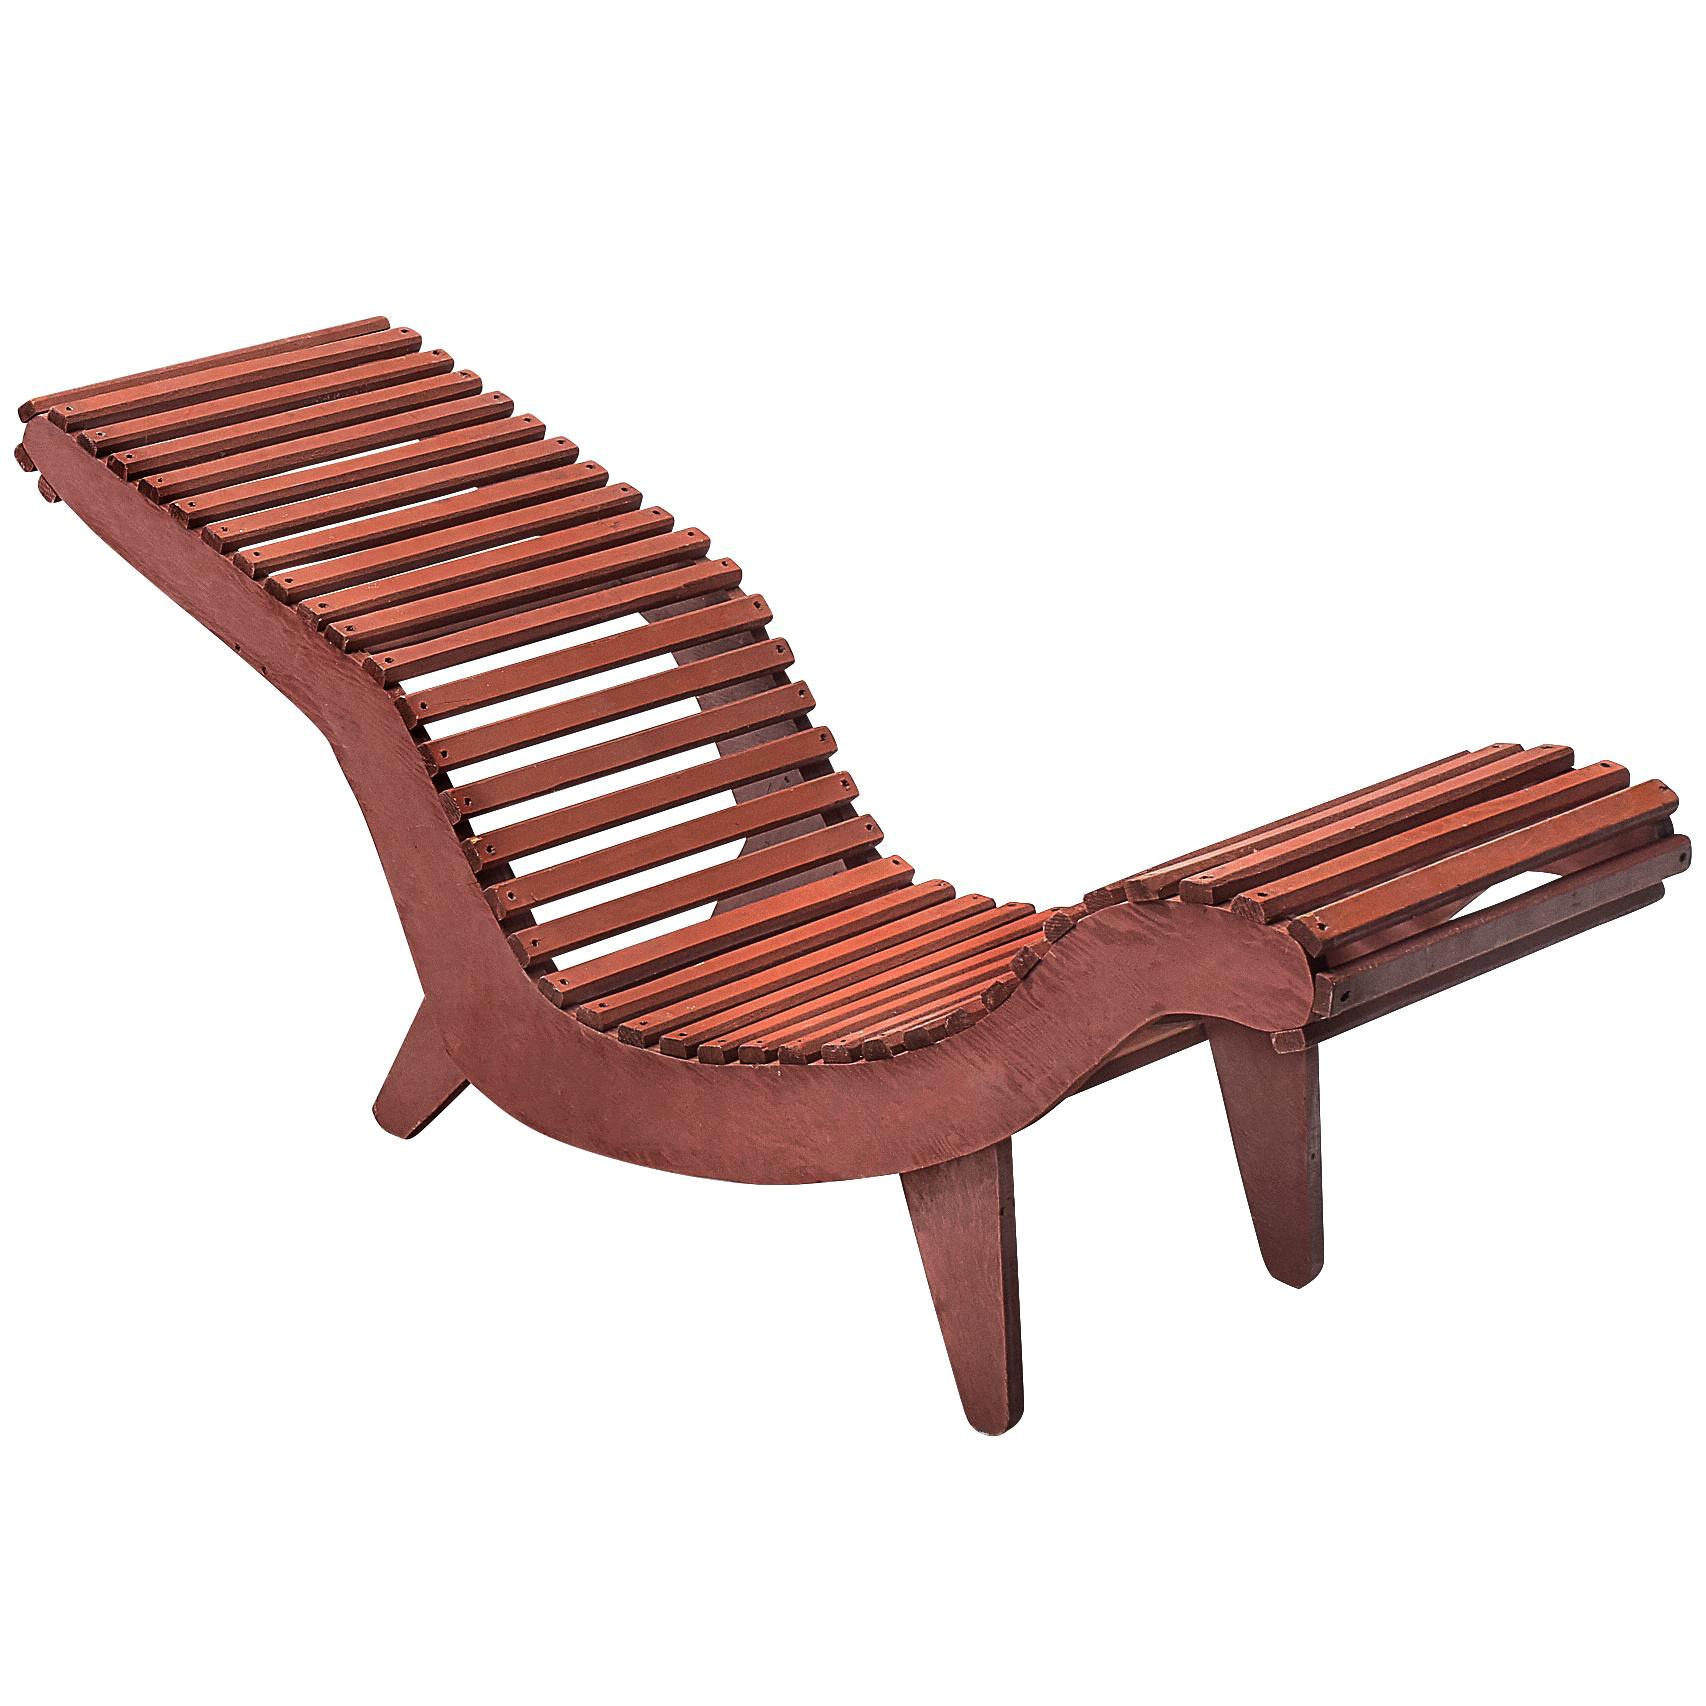 Klaus Grabe Adjustable Chaise Longue Model C5 in Stained Red Wood